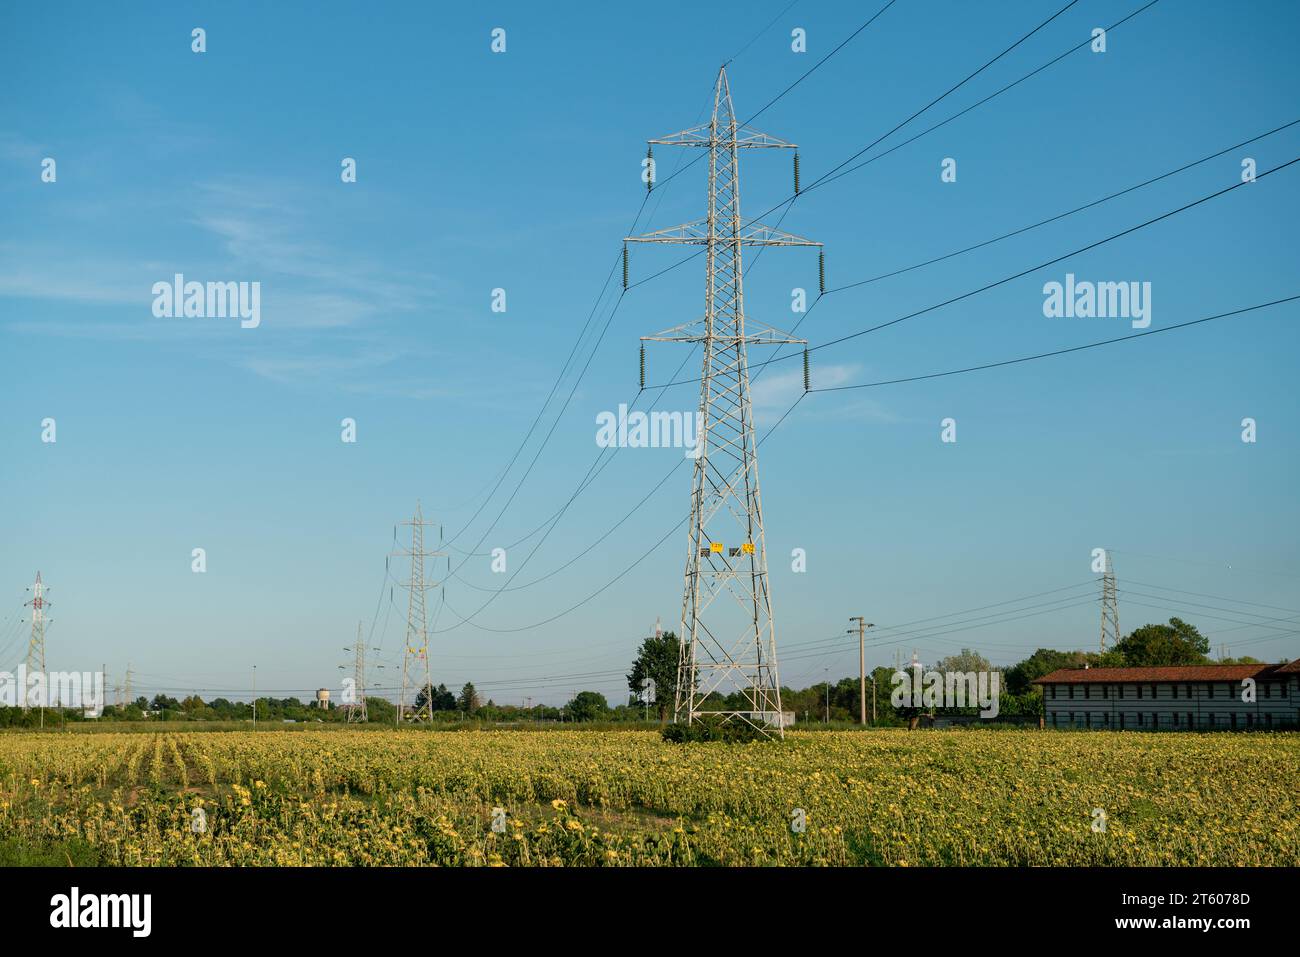 electricity pylon: energy crisis and energy cost, two increasingly important voices in the economic and political debate of the world. Stock Photo